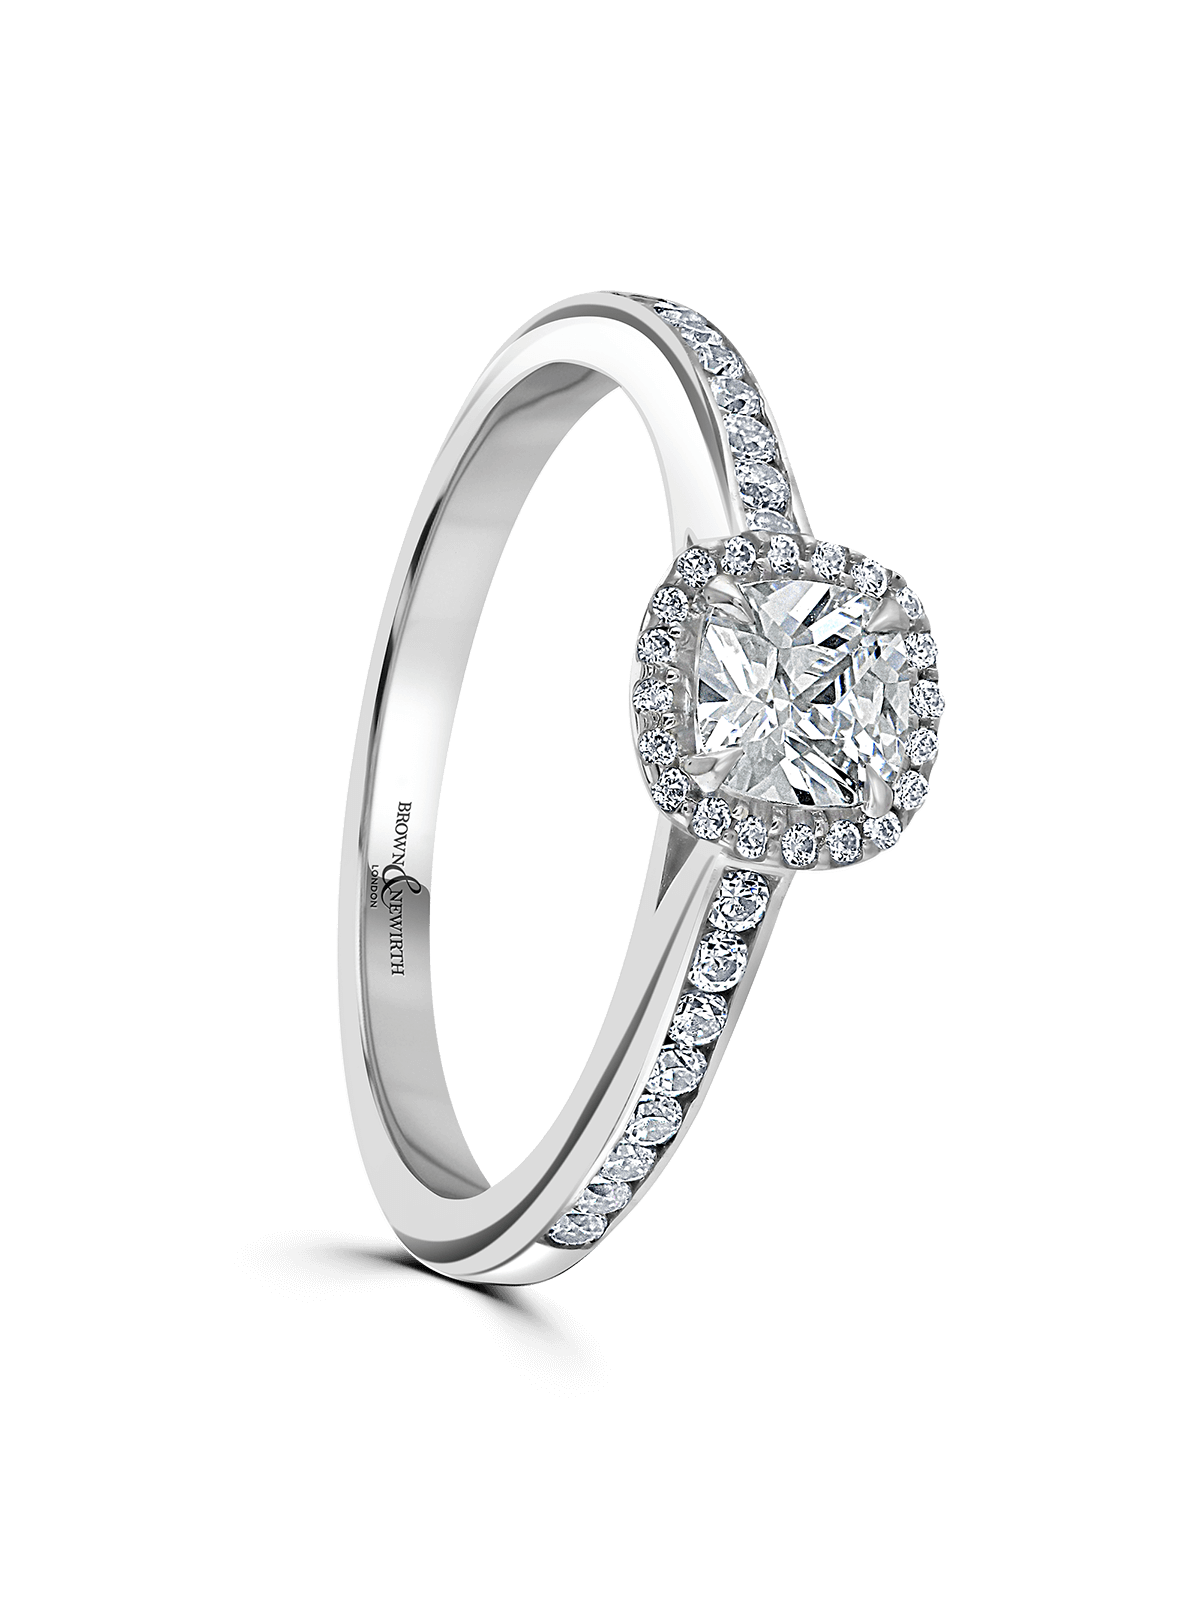 Brown & Newirth Ariel 0.50ct Cushion Cut Certificated Diamond Halo Engagement Ring in Platinum